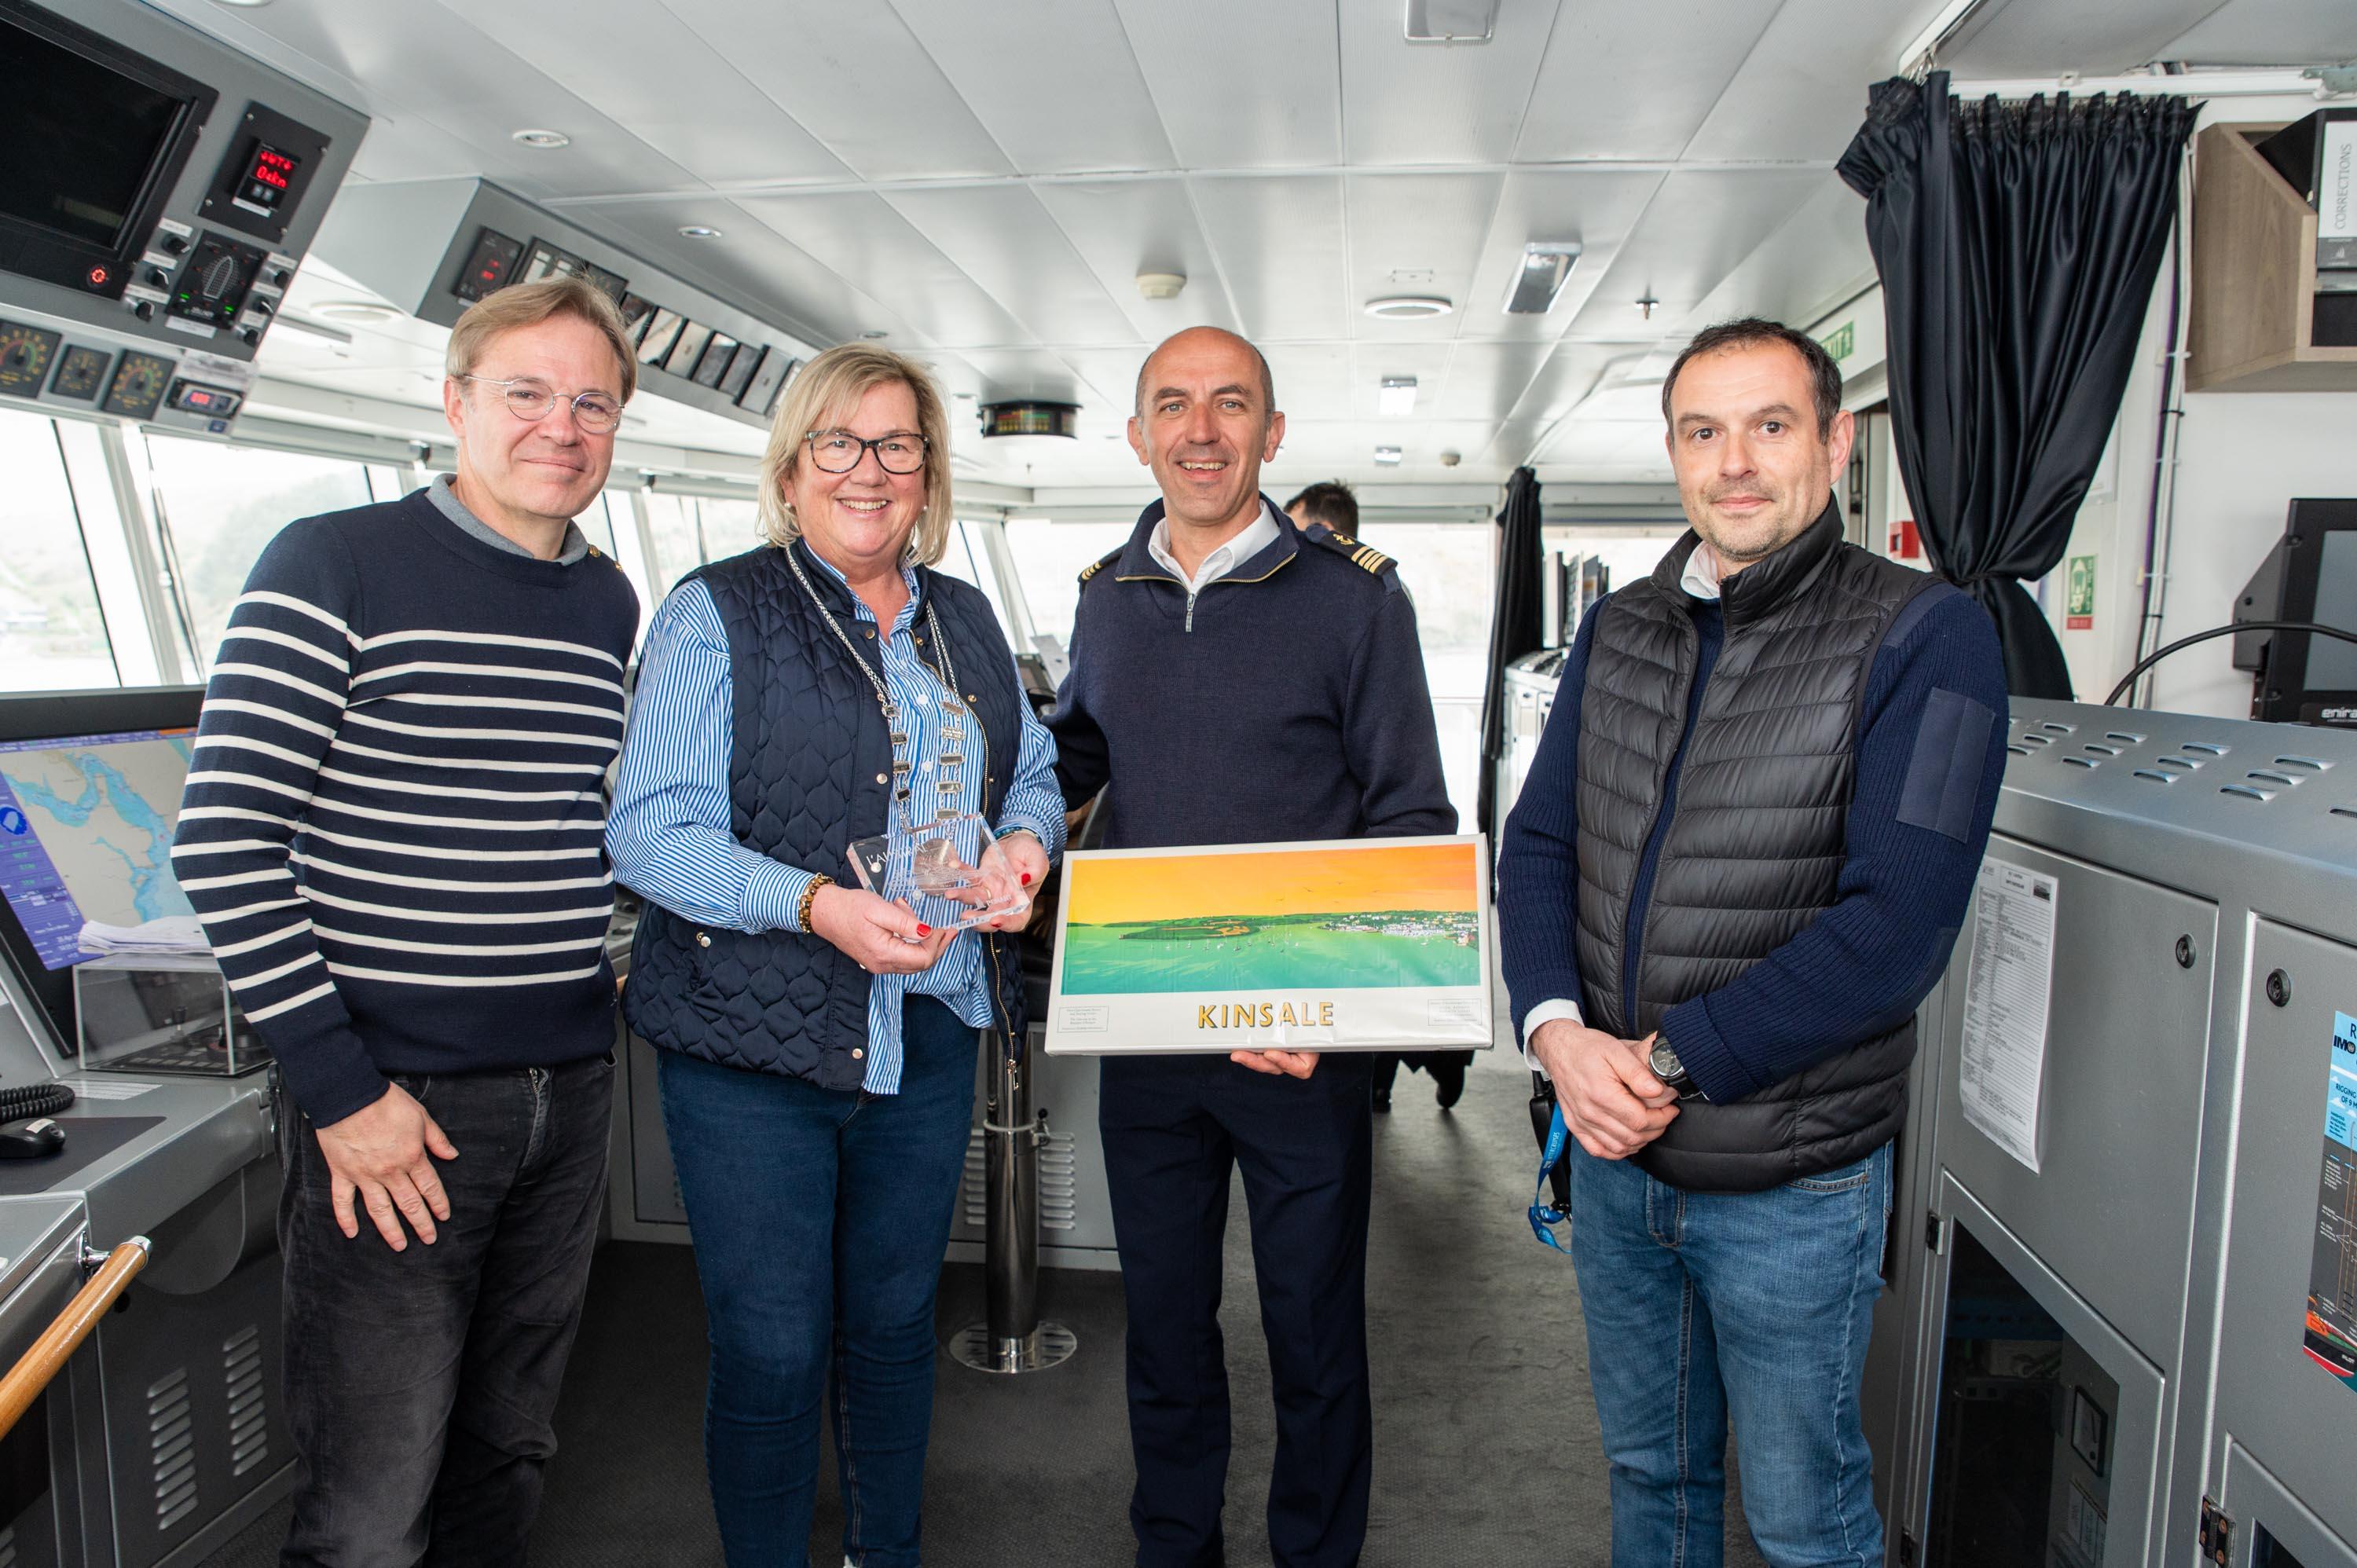 Cllr. Marie O’Sullivan, Chair of the Bandon Kinsale District and Cork County Council's senior harbour master Julian Renault exchanging gifts with the President of Ponant Cruises Hervé Gastinel and the ships captain Stanislas Devorsine on the bridge of the expedition cruise liner L’Austral which visited Kinsale last week. 